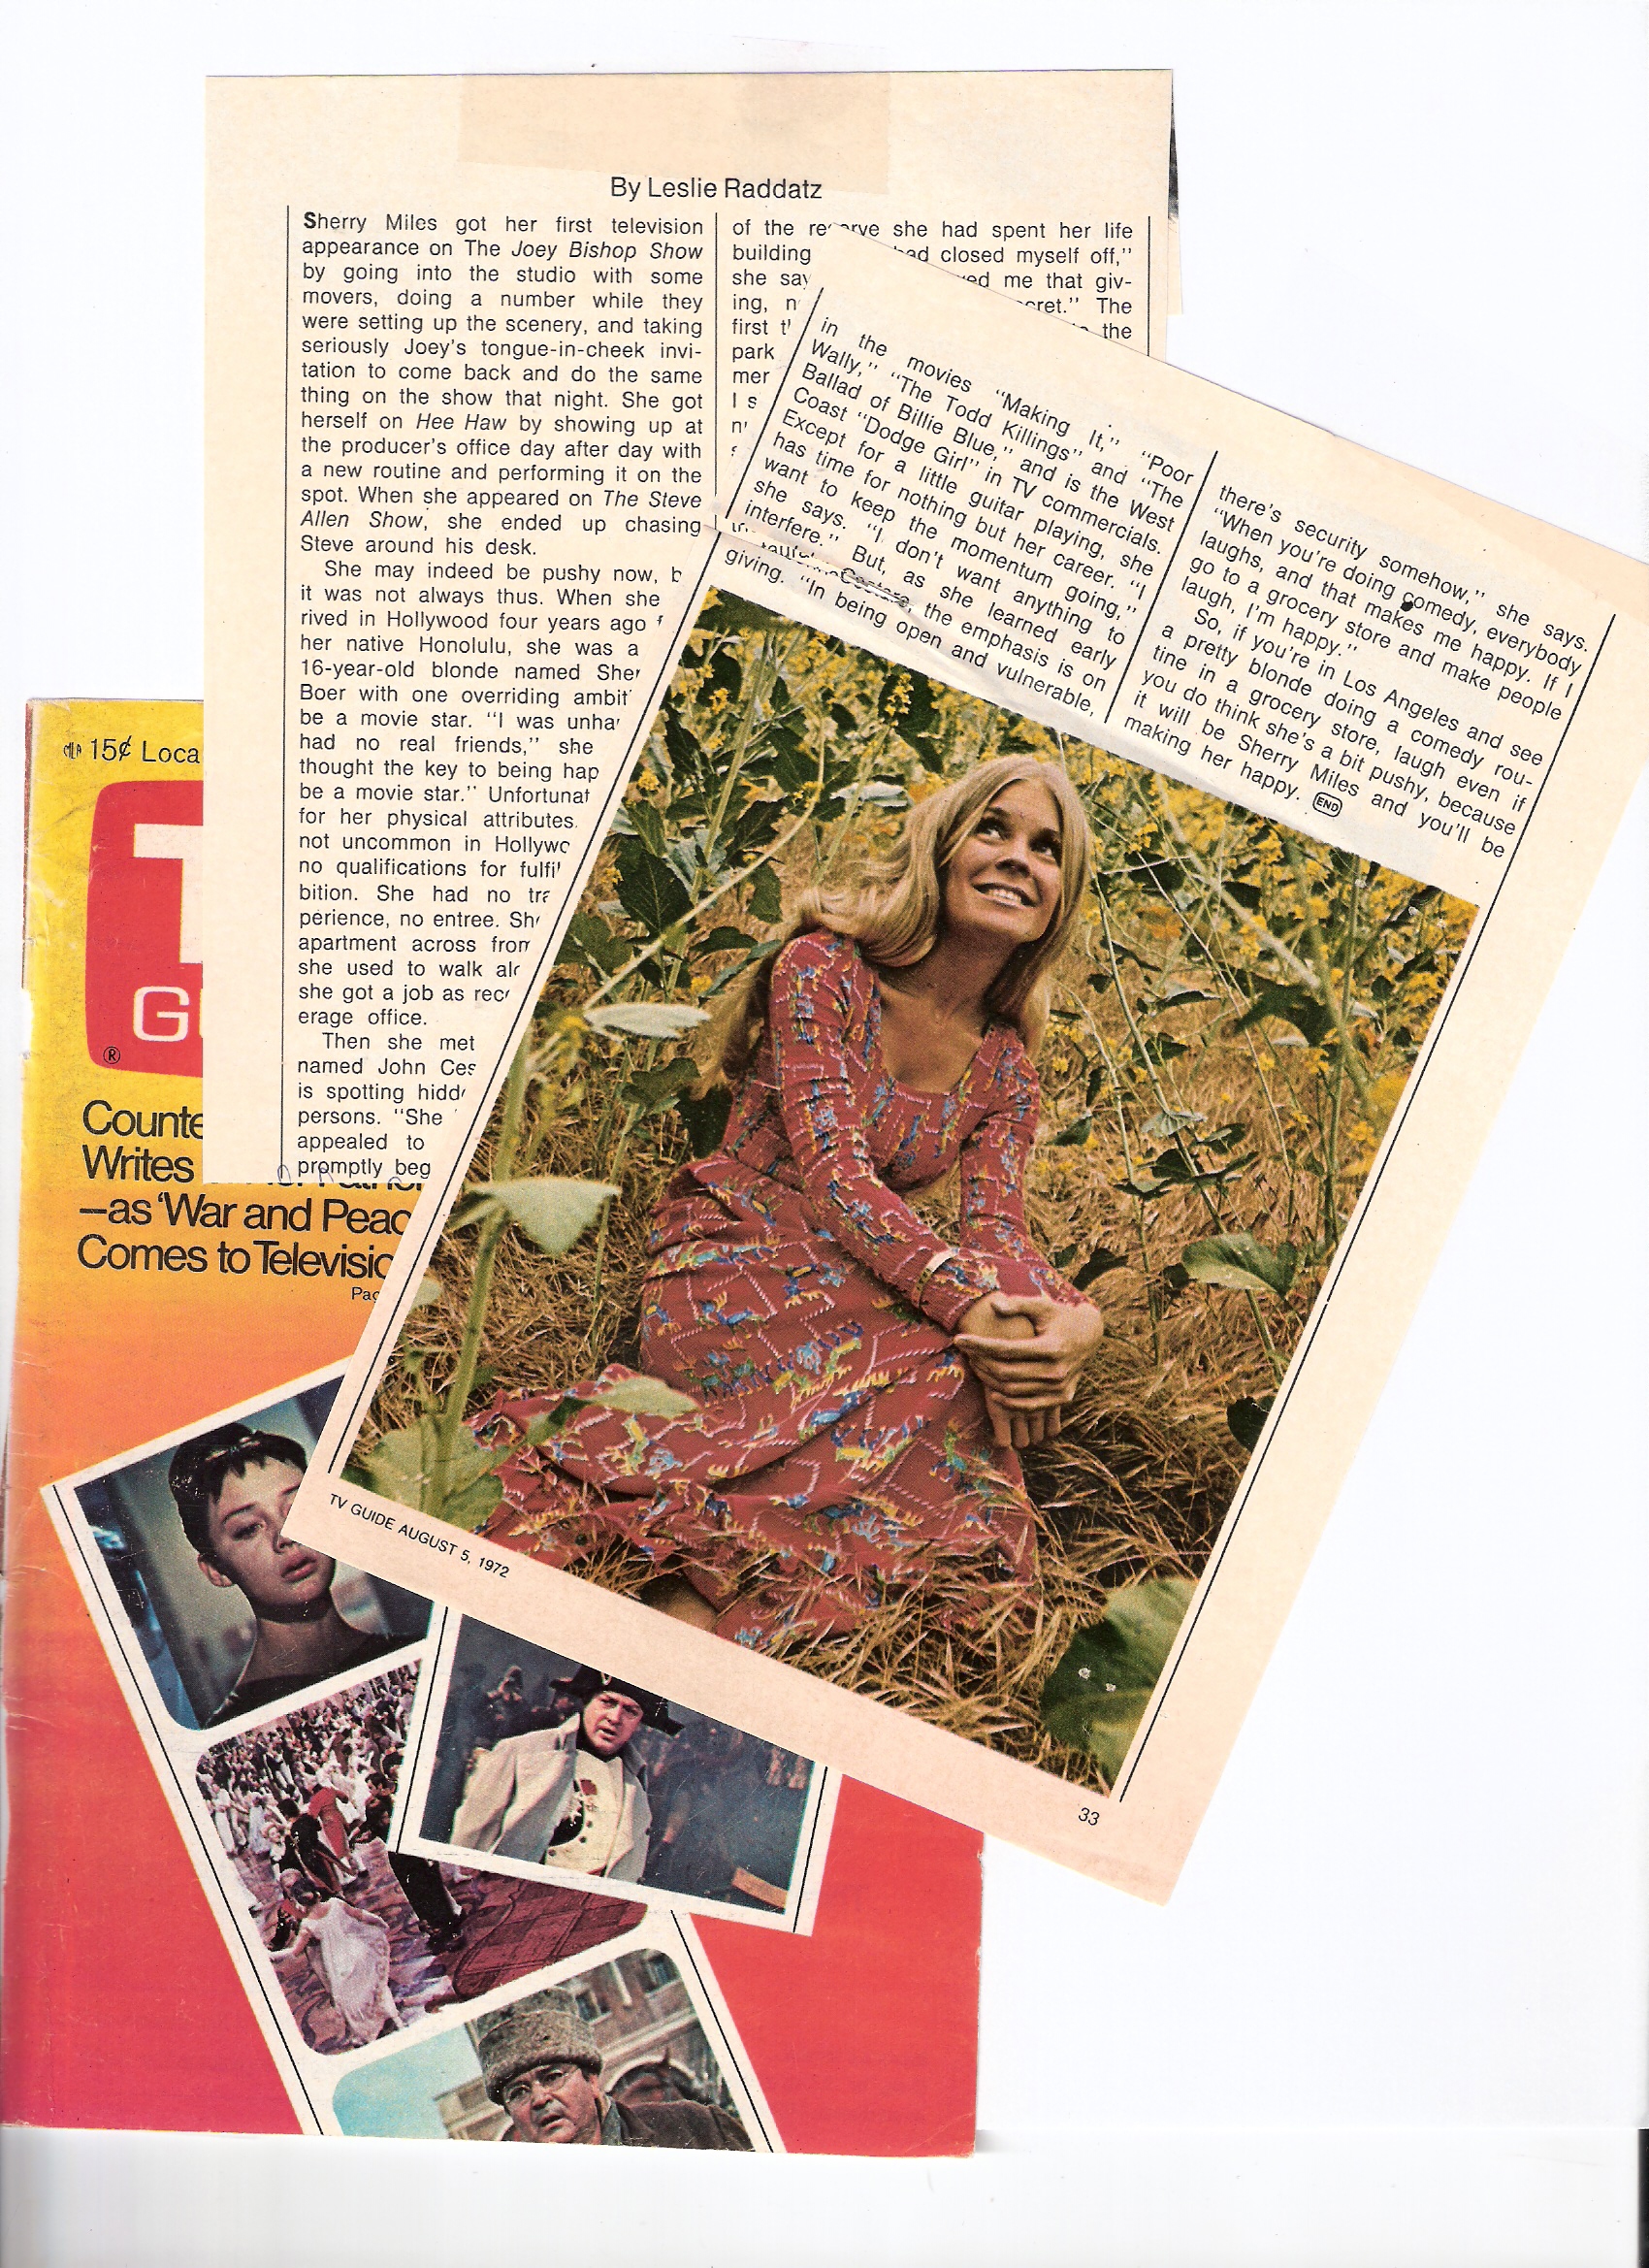 Feature story in TV Guide August 5-11, 1972.